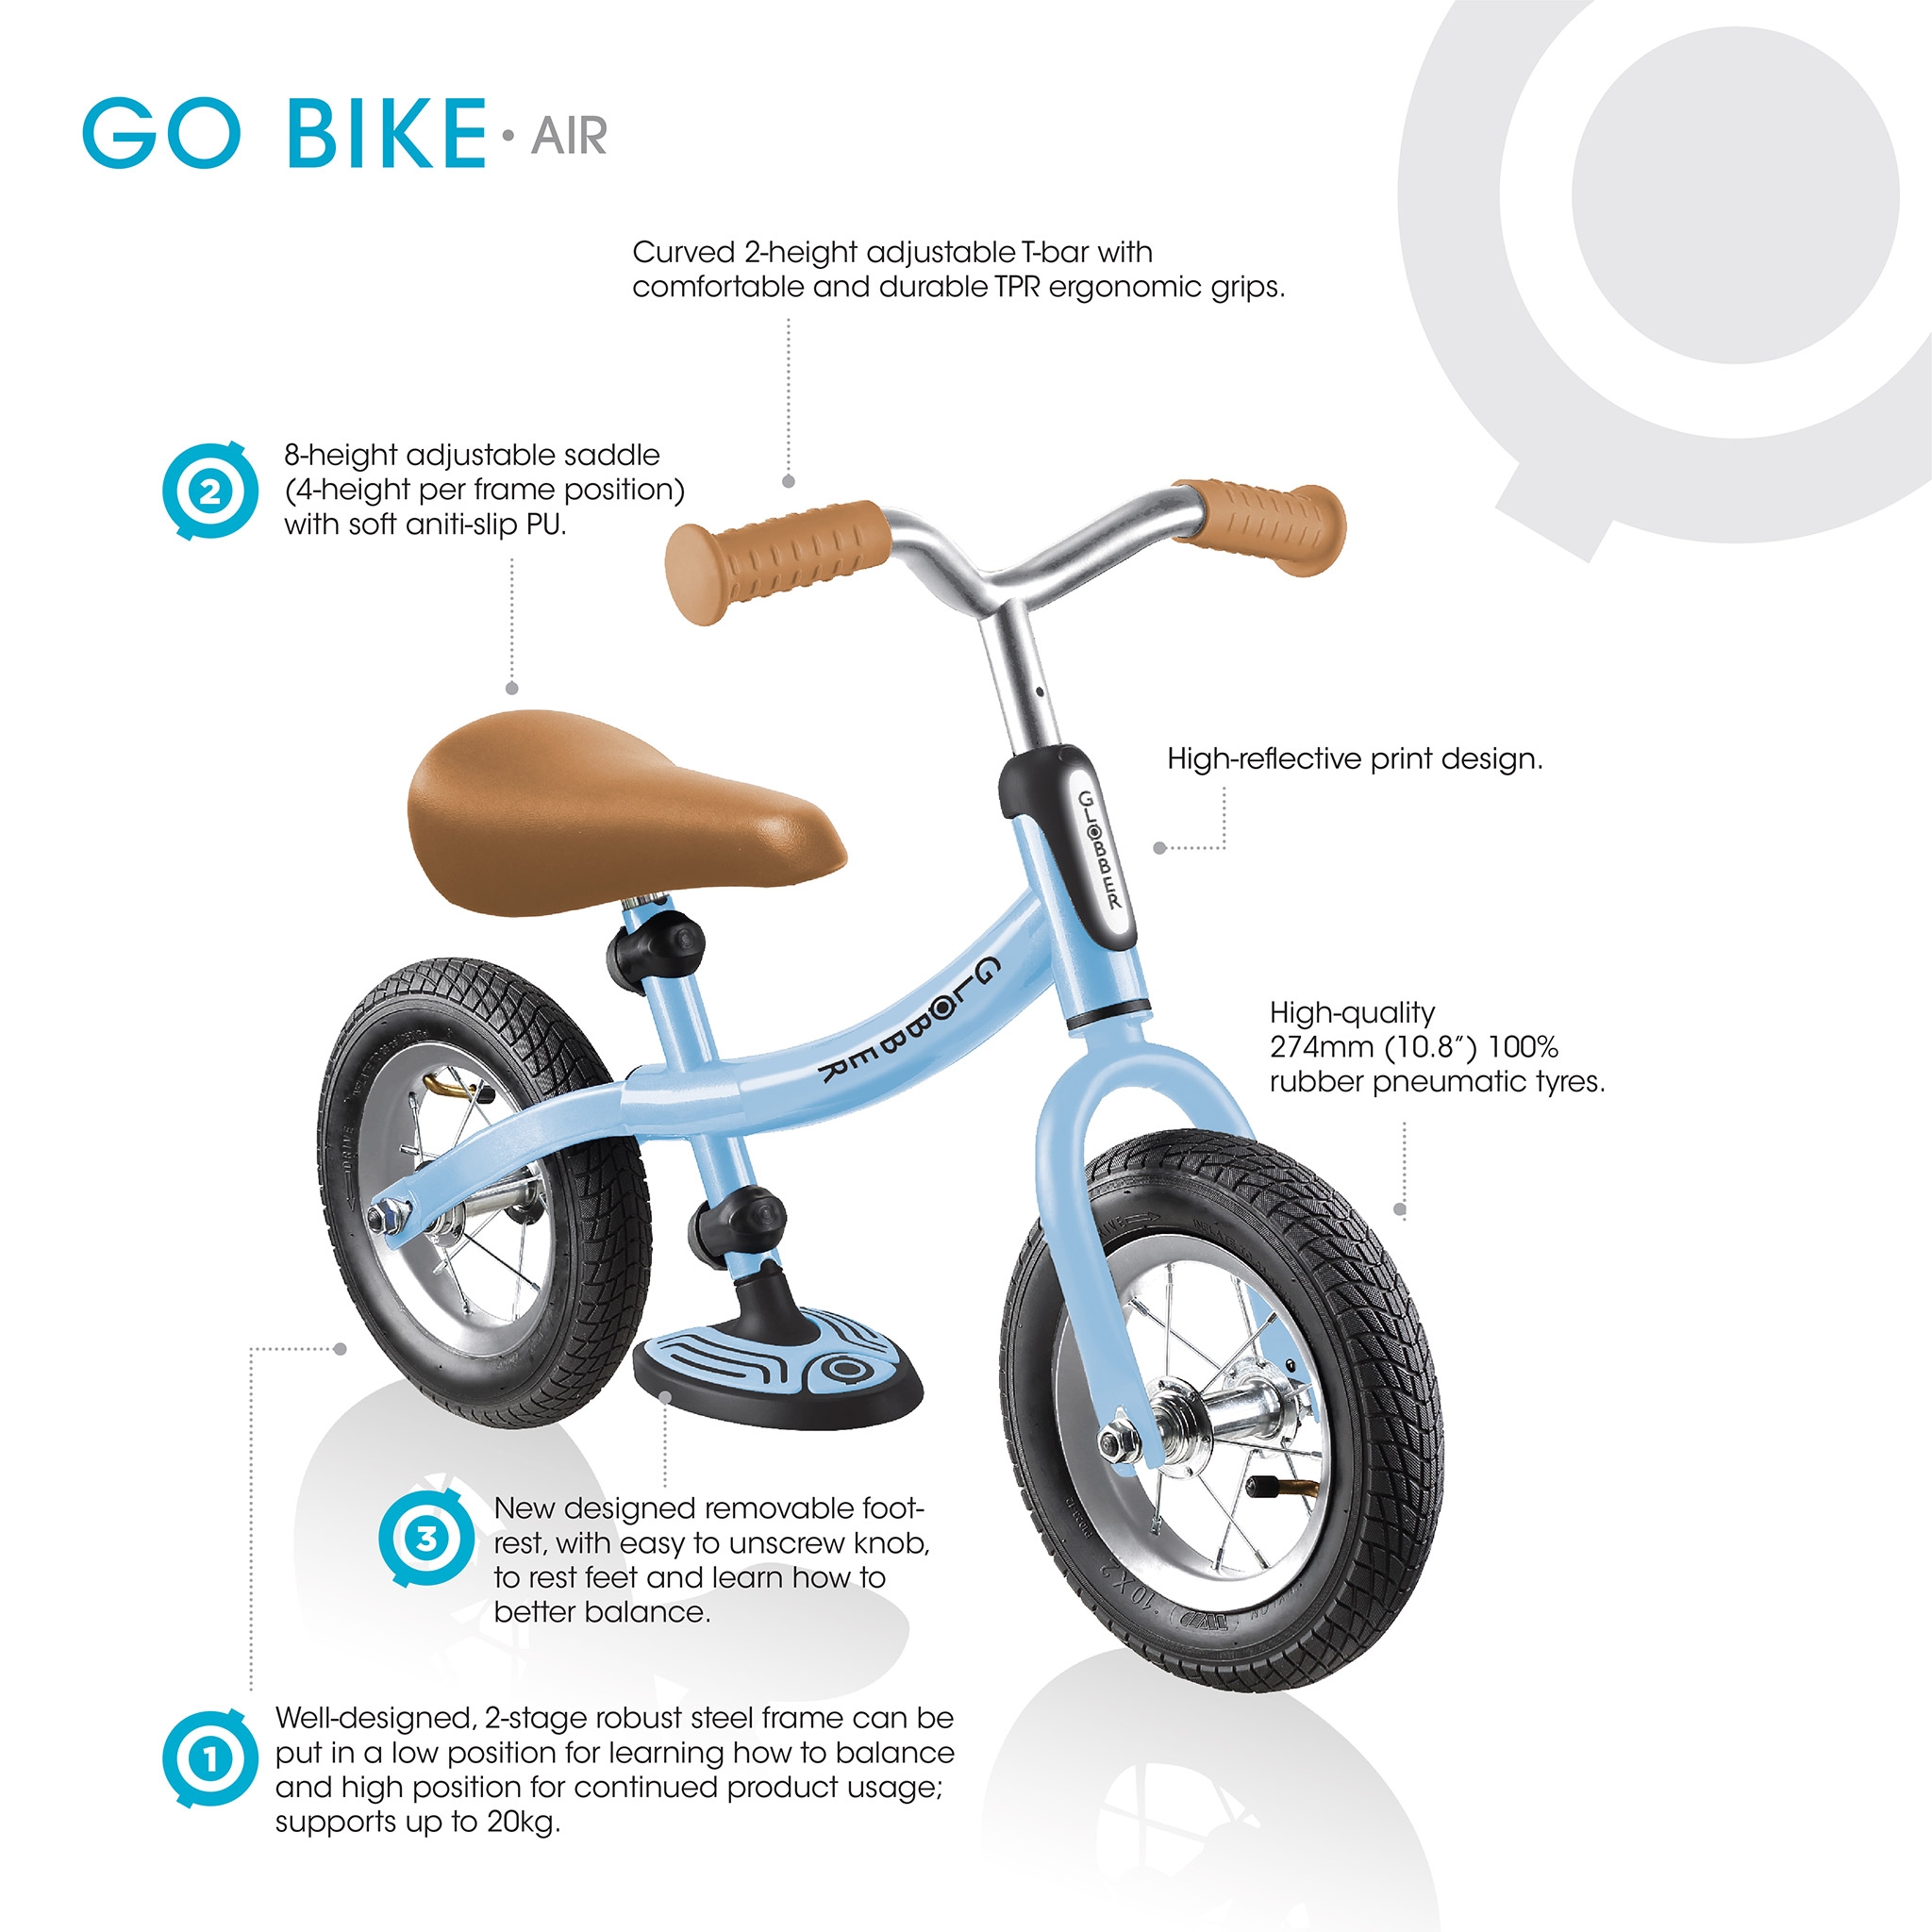 GO-BIKE-AIR-big-toddler-balance-bike-for-girls-and-boys-aged-3-to-6-with-rubber-air-tyres 3